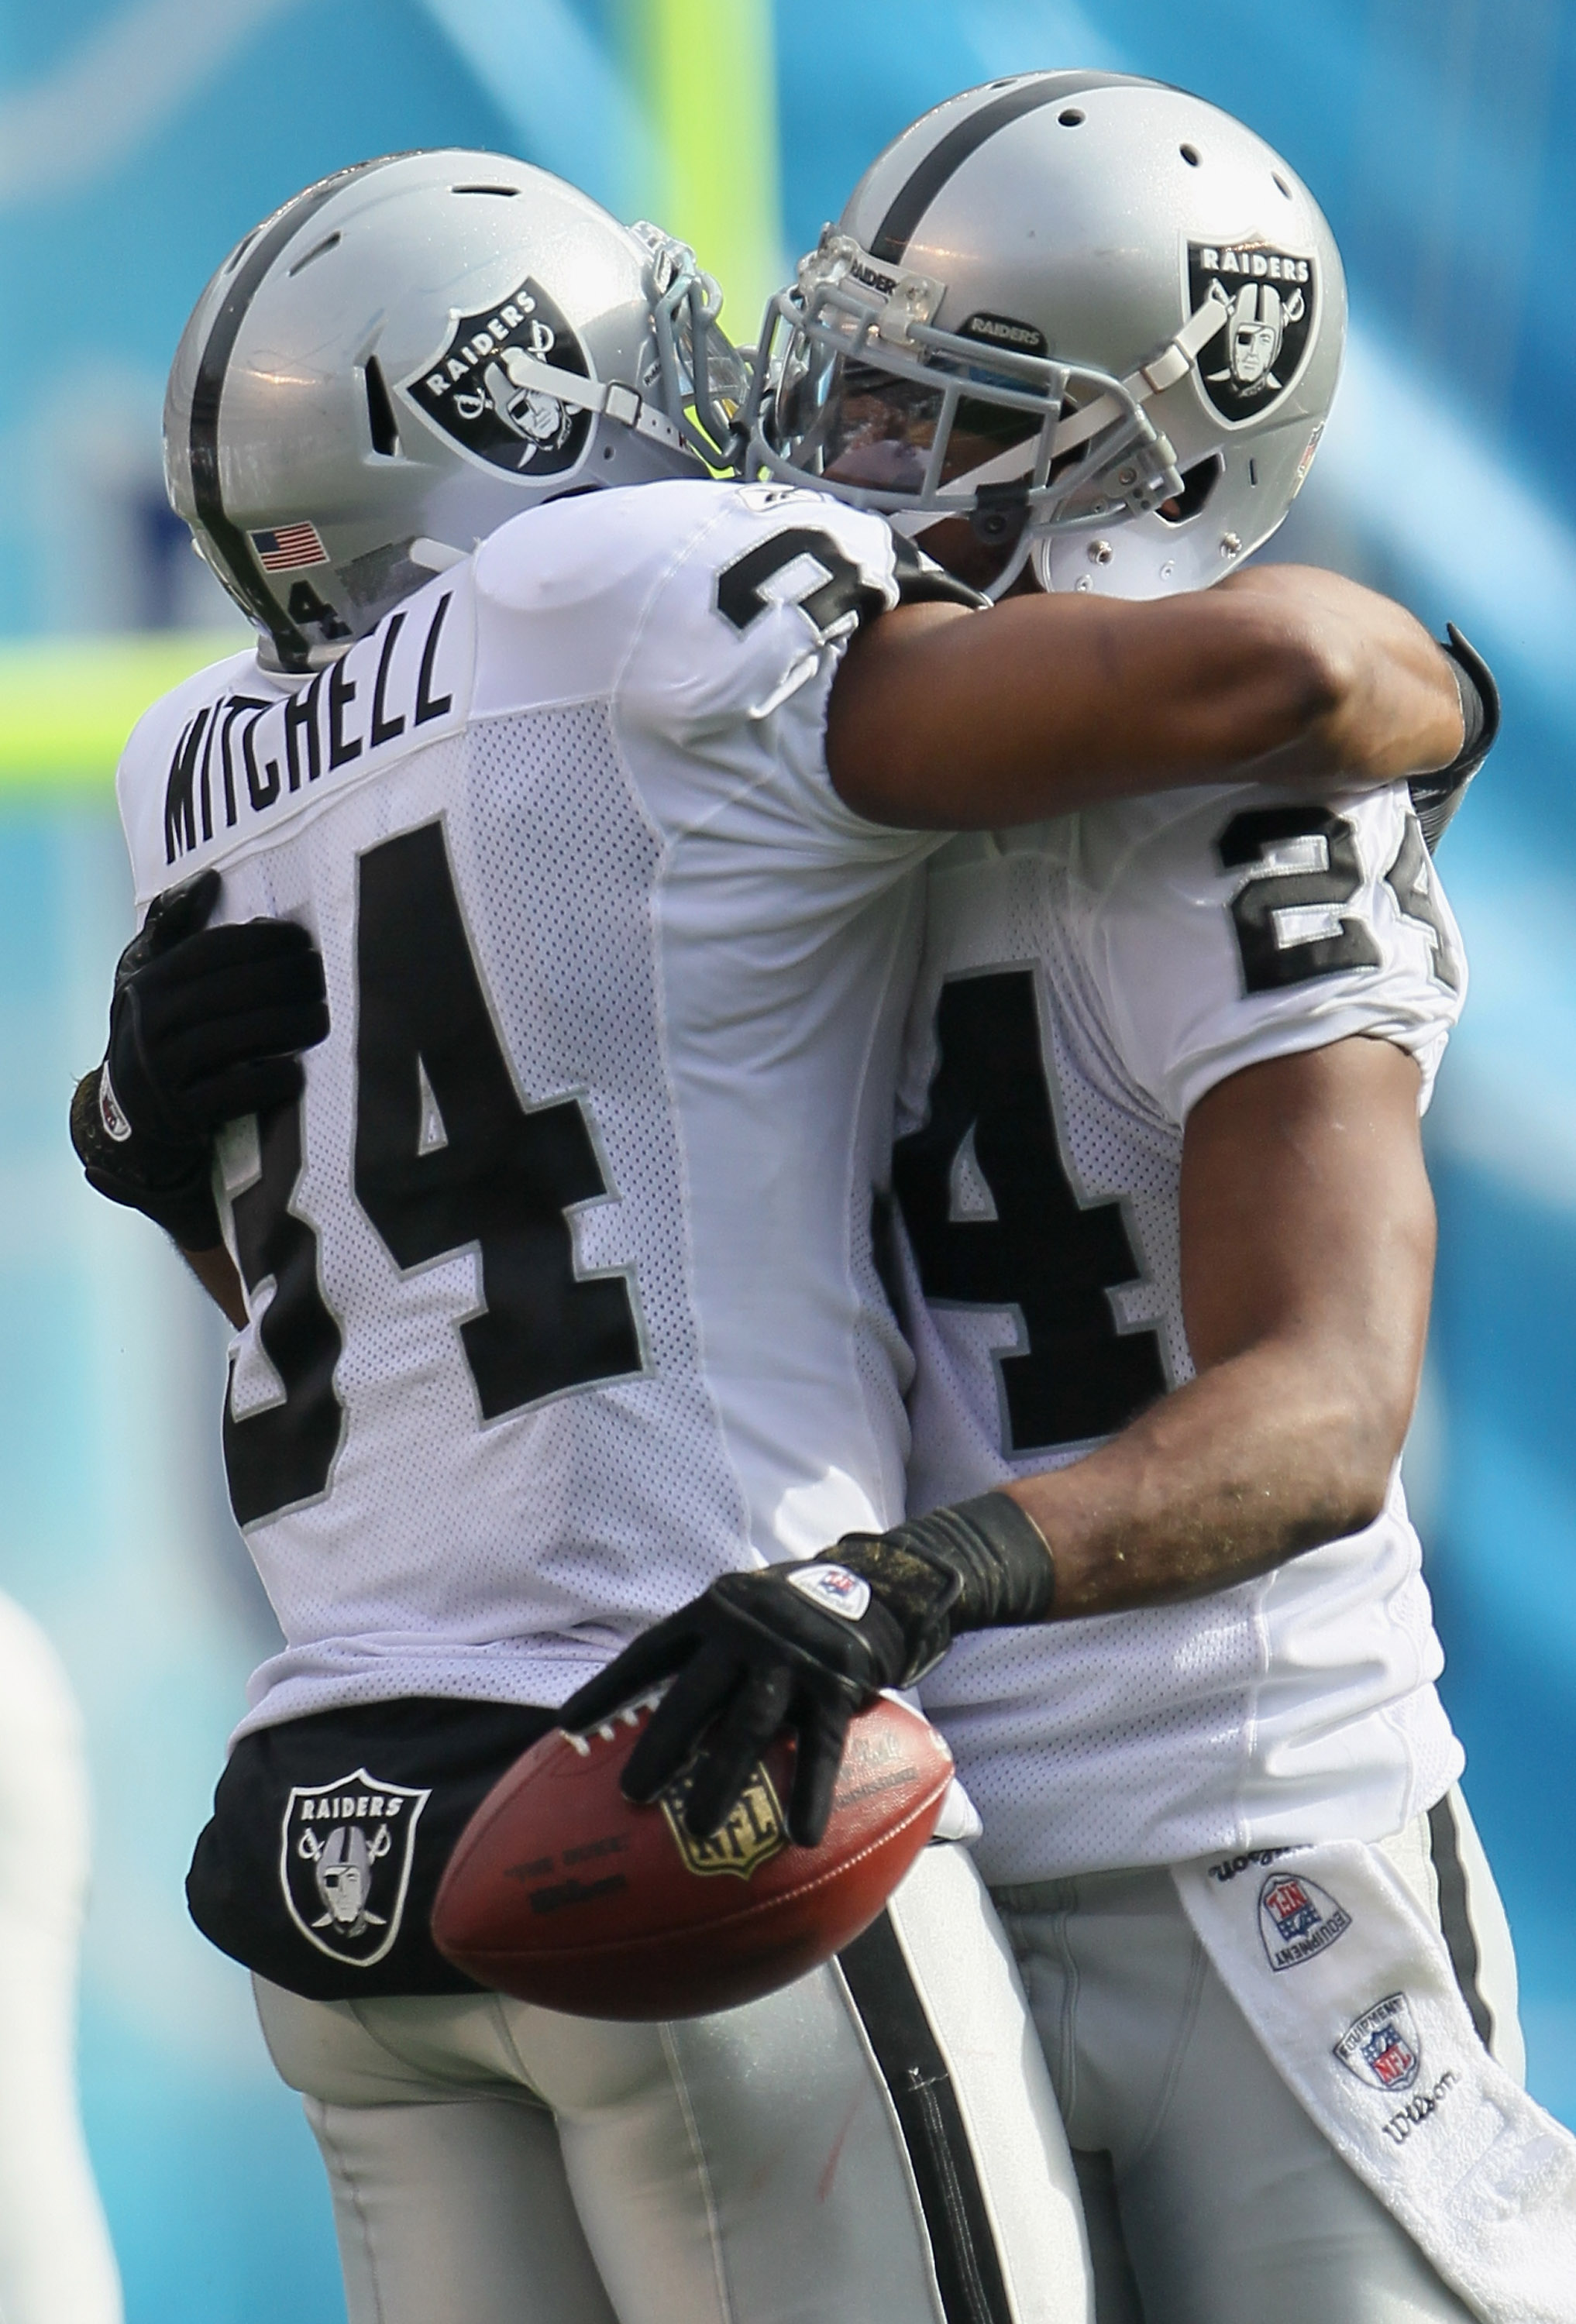 SAN DIEGO - DECEMBER 05:  Safety Michael Huff (R) #24 the Oakland Raiders is congratulated by teammate Mike Mitchell #34 after intercepting a pass against the San Diego Chargers during the first quarter at Qualcomm Stadium on December 5, 2010 in San Diego